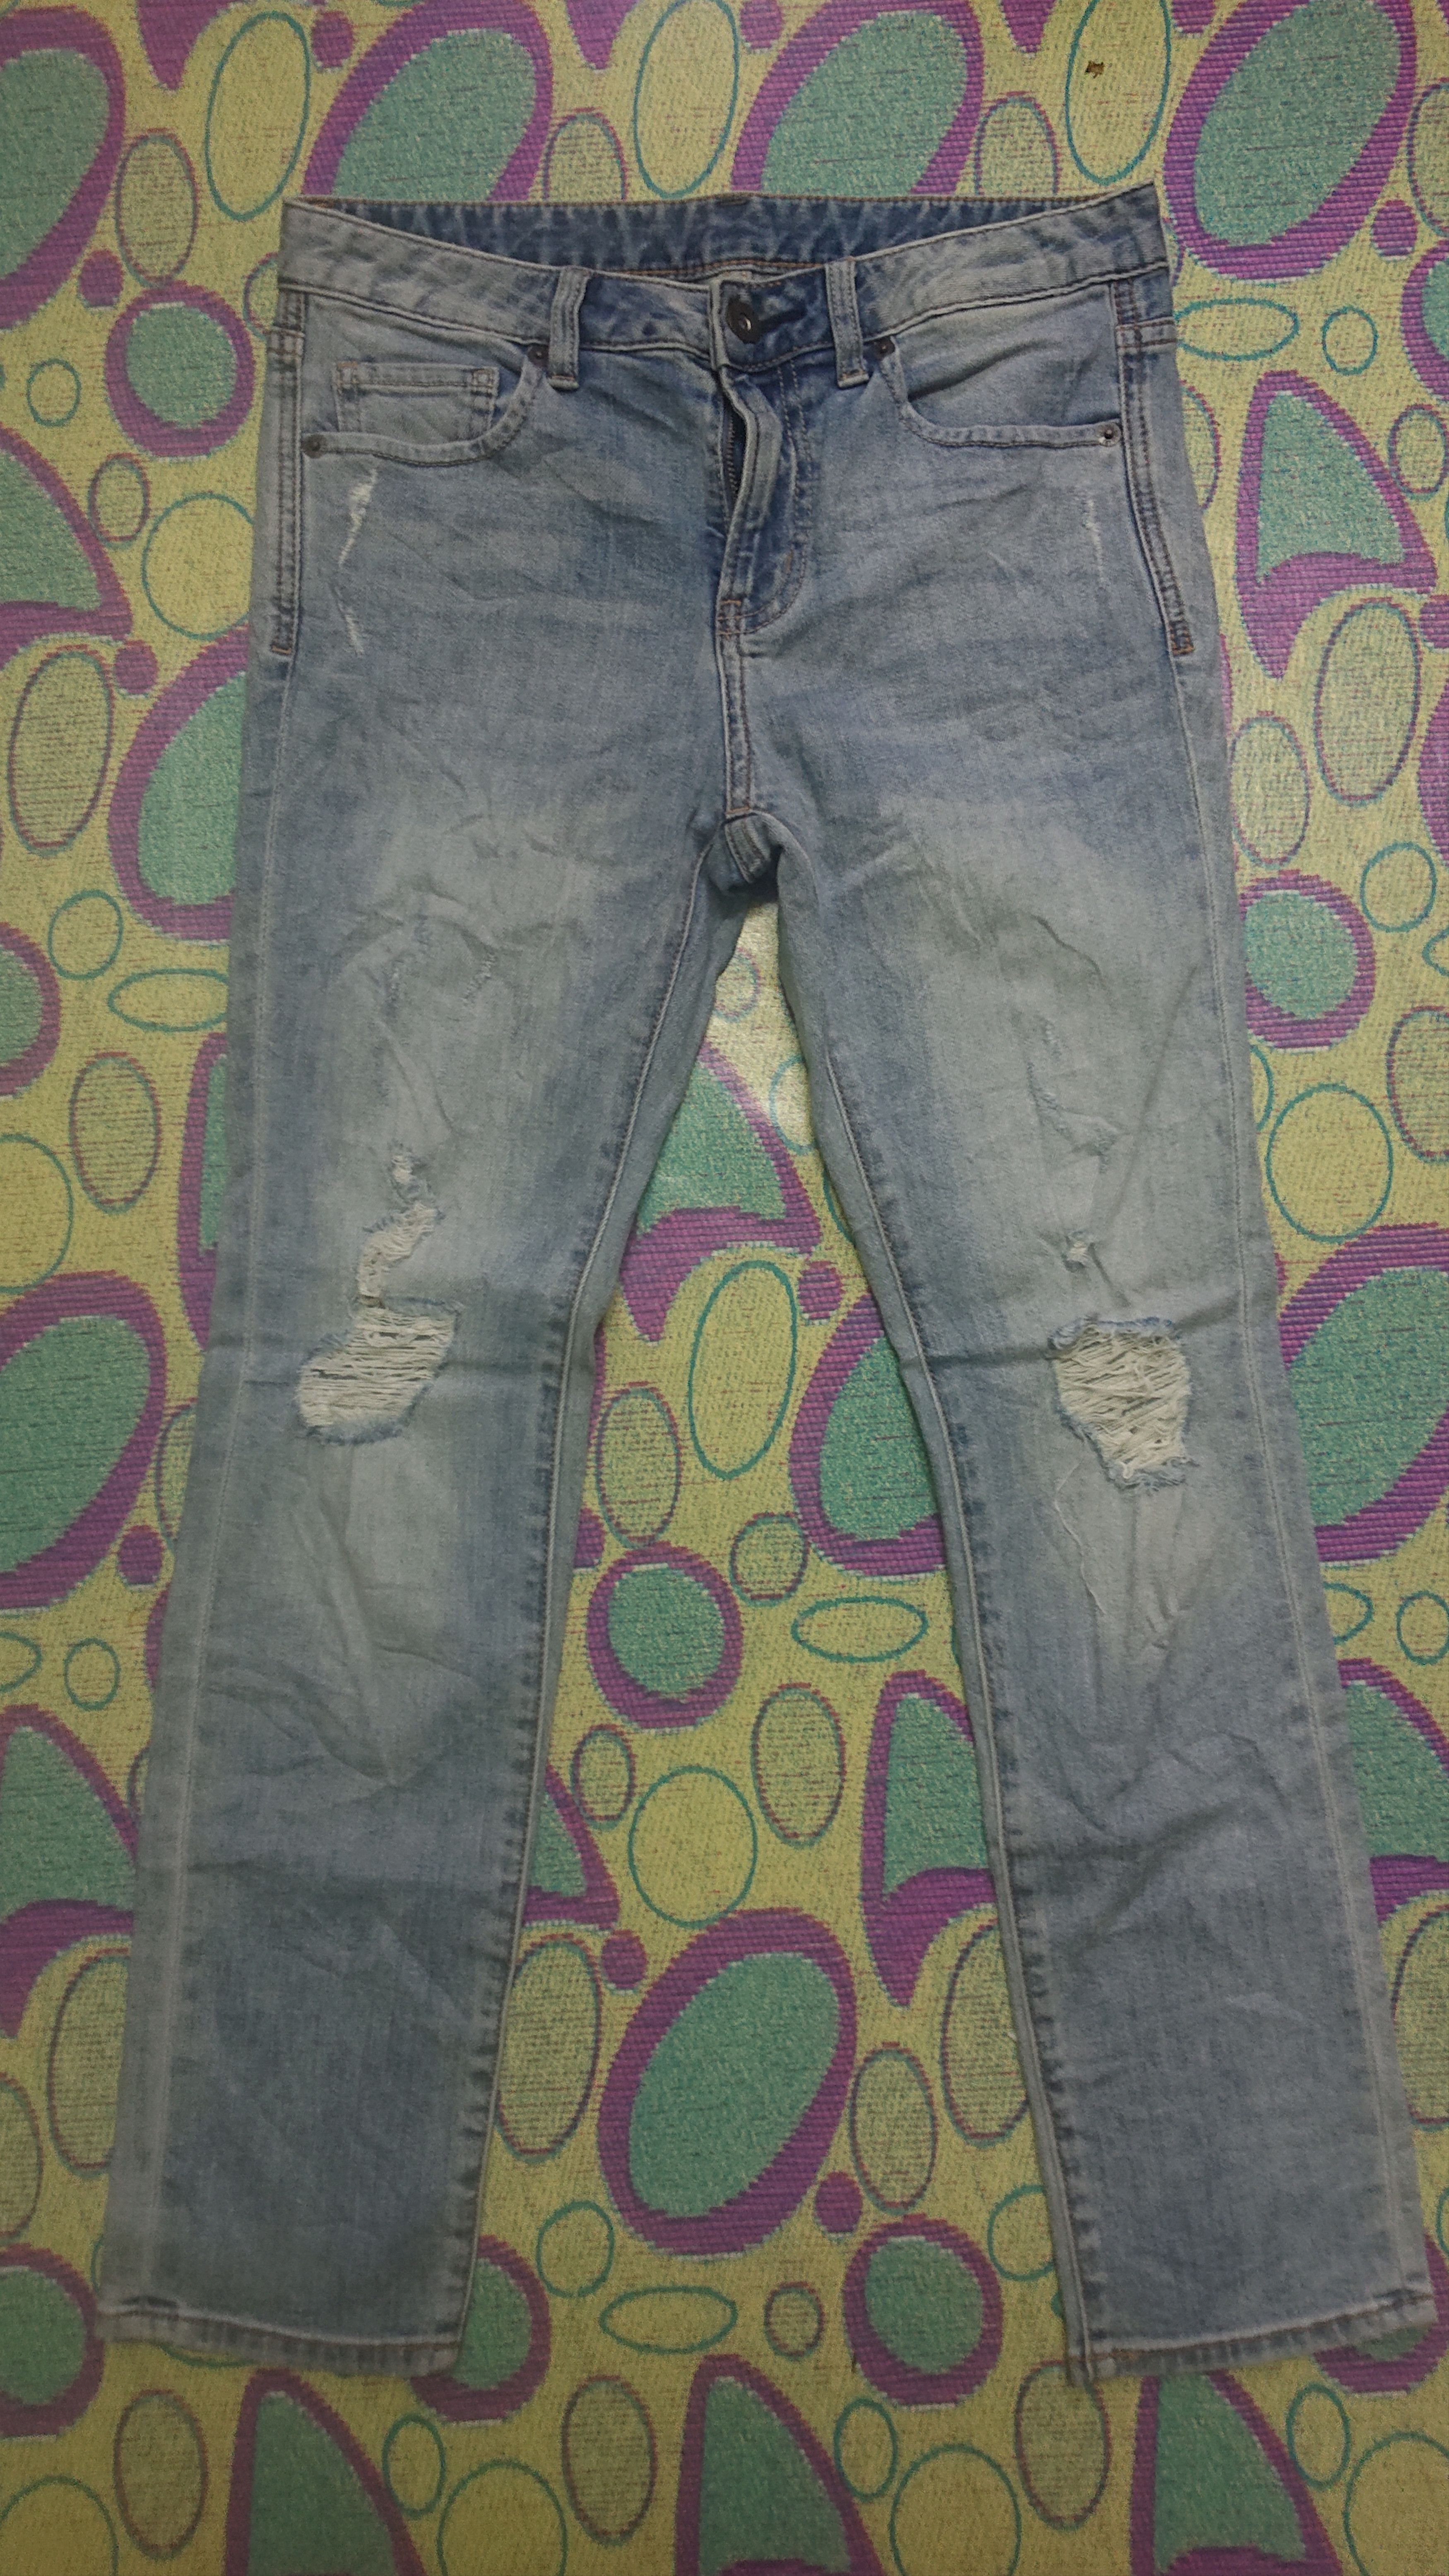 Vintage gu jeans made in japan Size 27" / US 4 / IT 40 - 1 Preview